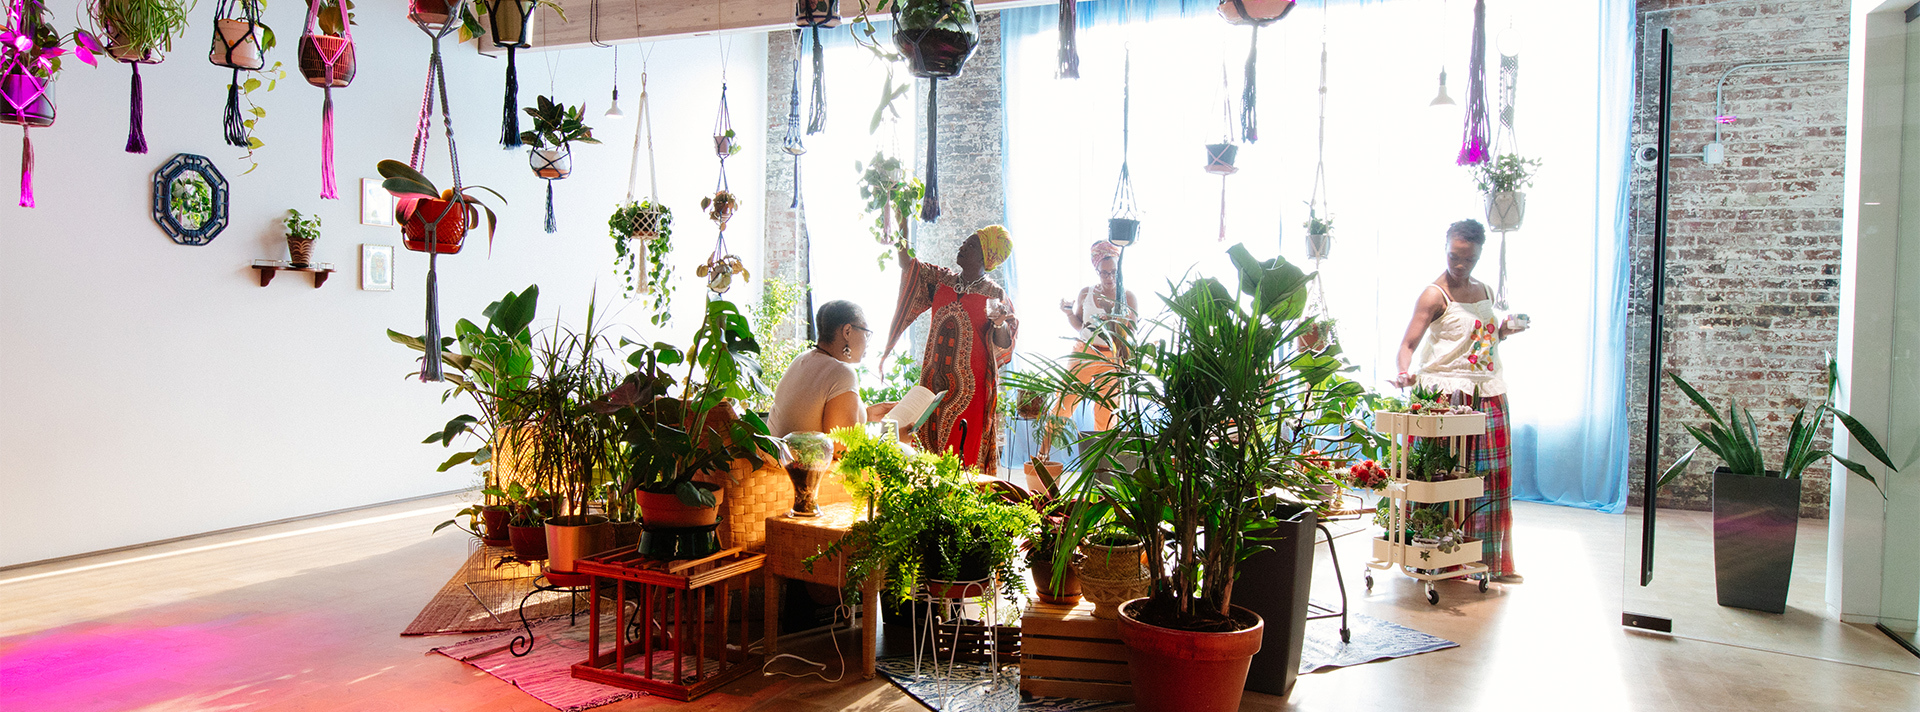 Banner view of Angela Drakeford's Homecoming. The gallery is full of light and plants. Four Black women explore the space, sitting and reading, and reaching up toward plants hanging from the ceiling.